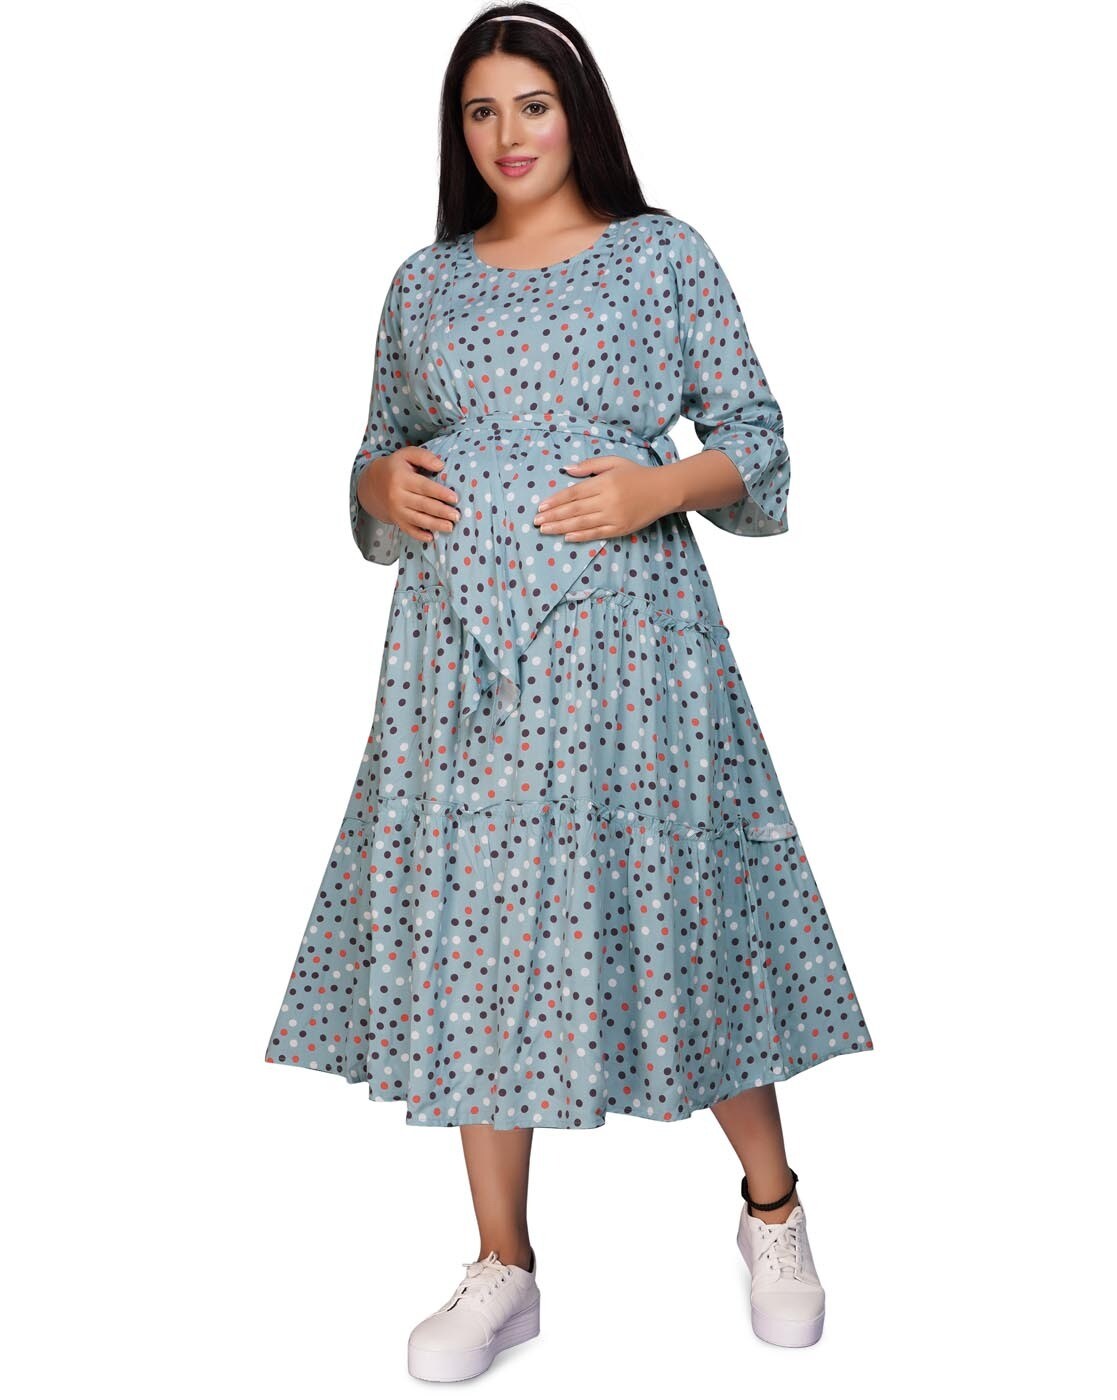 mamma's maternity Women Two Piece Dress Pink Dress - Buy mamma's maternity  Women Two Piece Dress Pink Dress Online at Best Prices in India | Flipkart .com